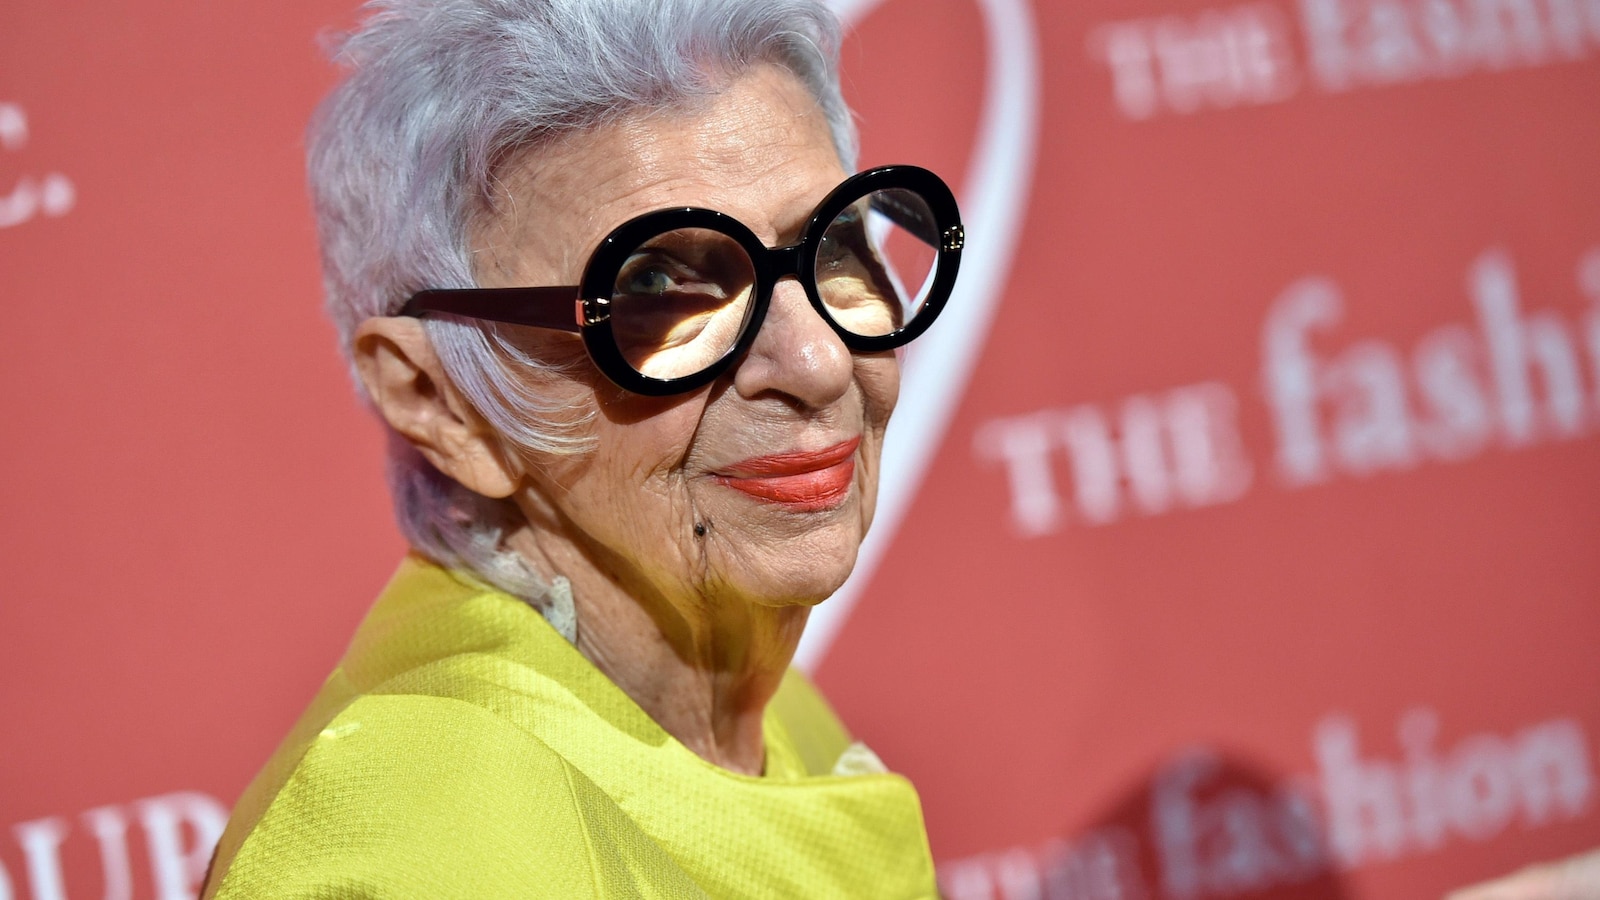 Fashion icon Iris Apfel passes away at the age of 102, known for her distinctive style